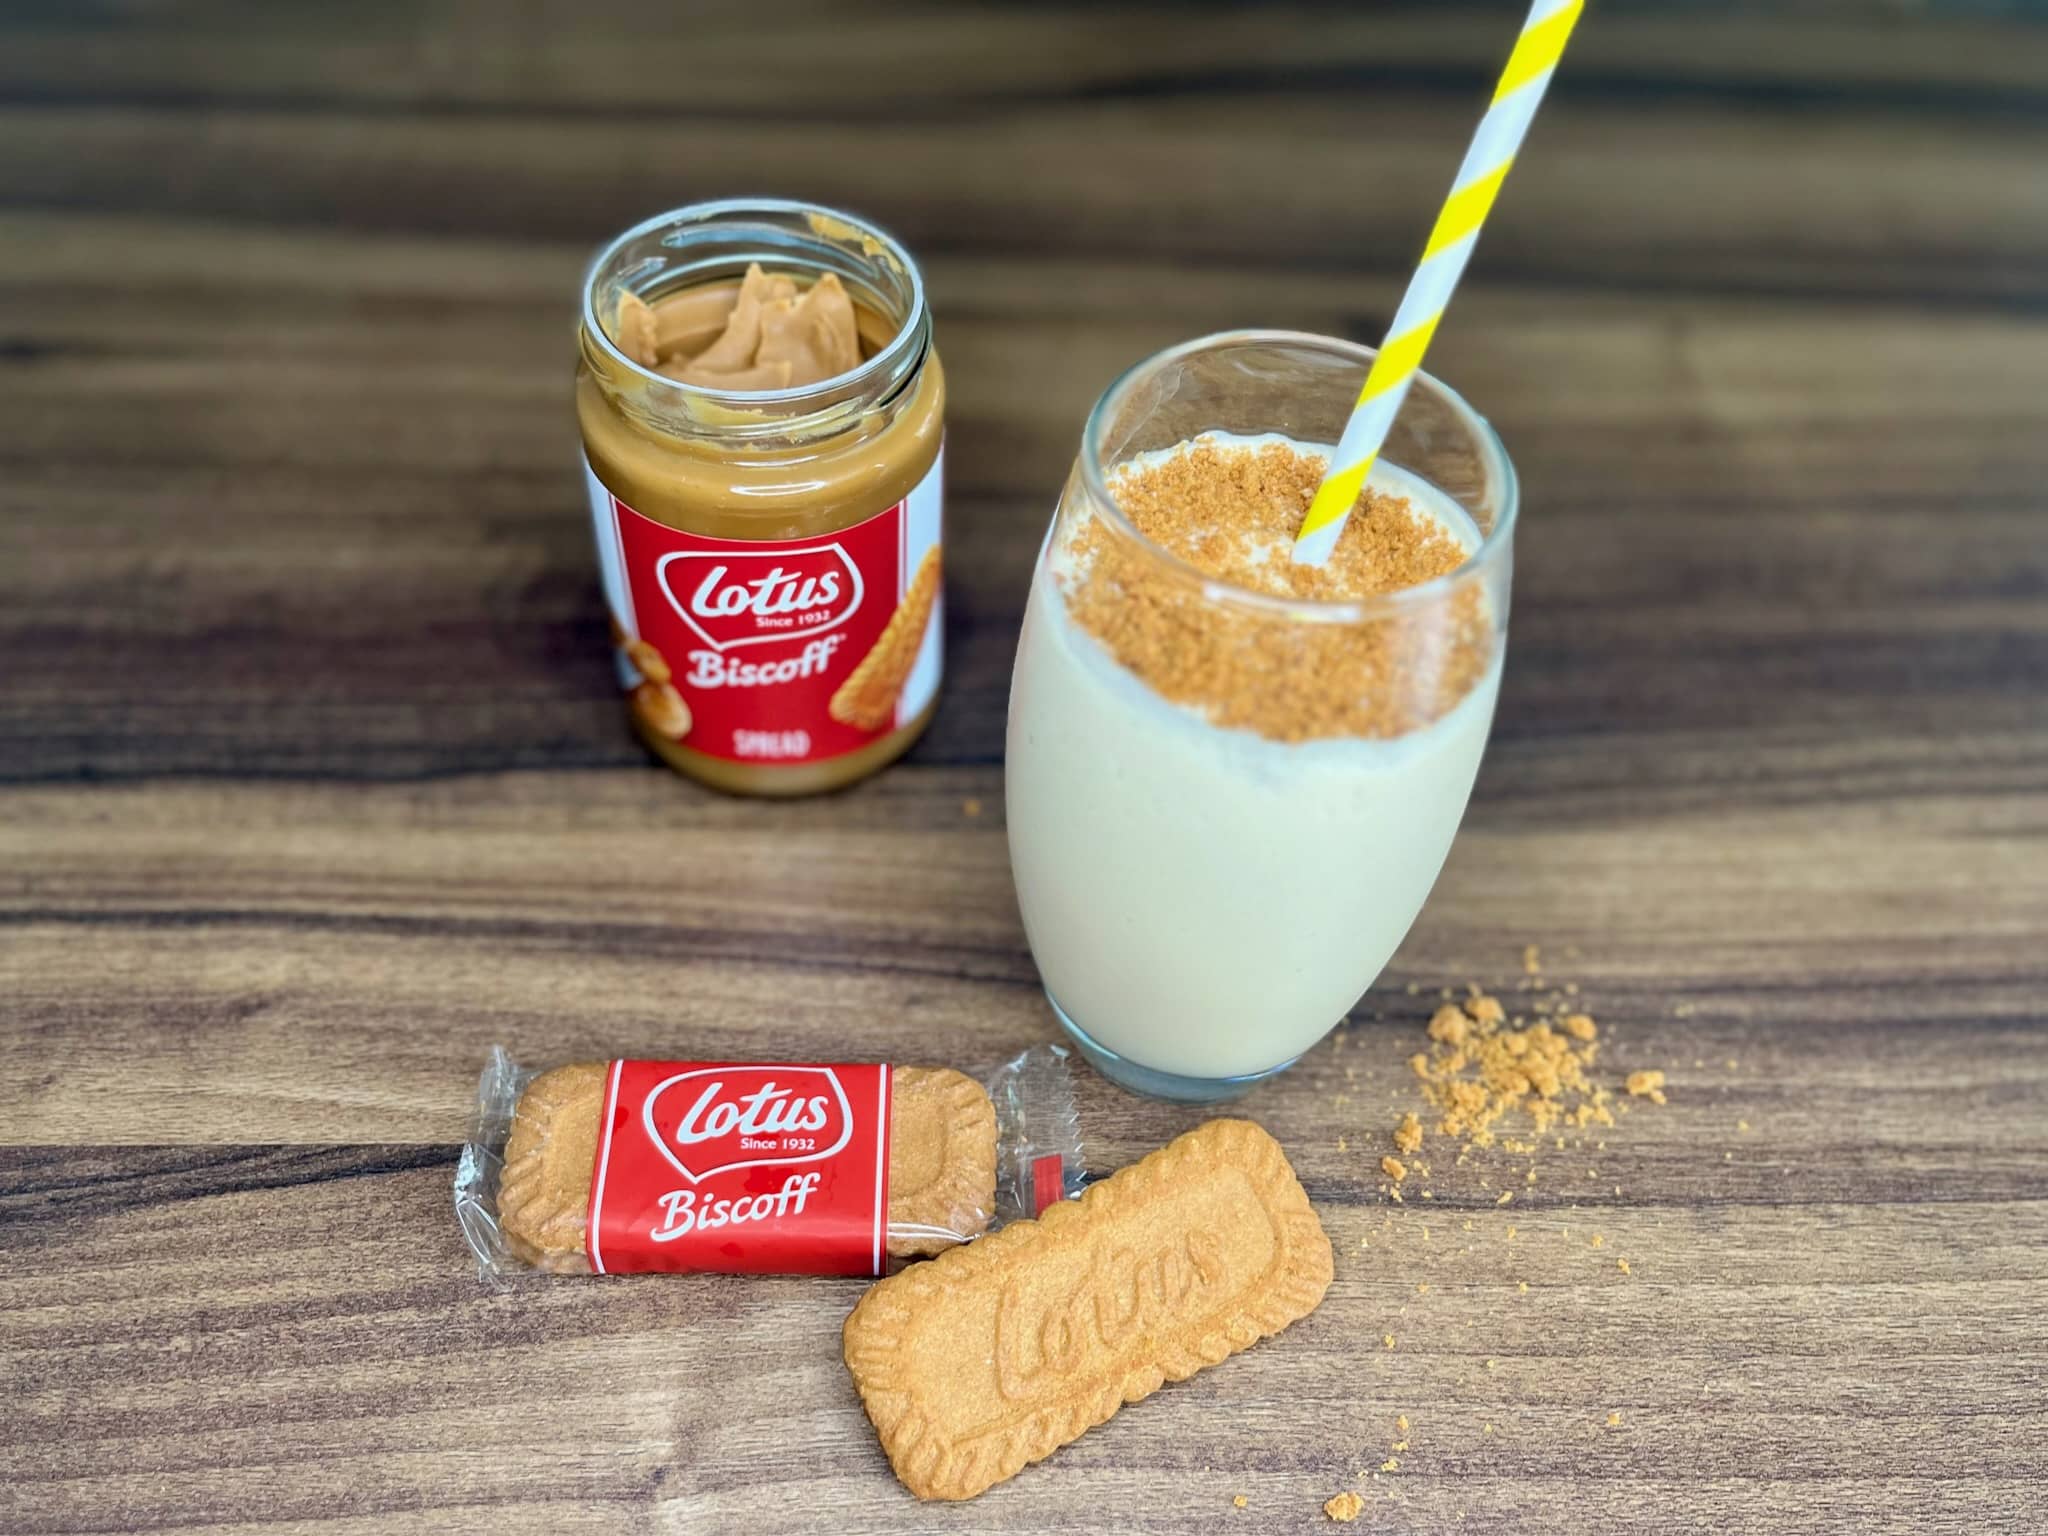 A tall glass of Biscoff milkshake with a straw, with Biscoff spread and biscuits on the side.